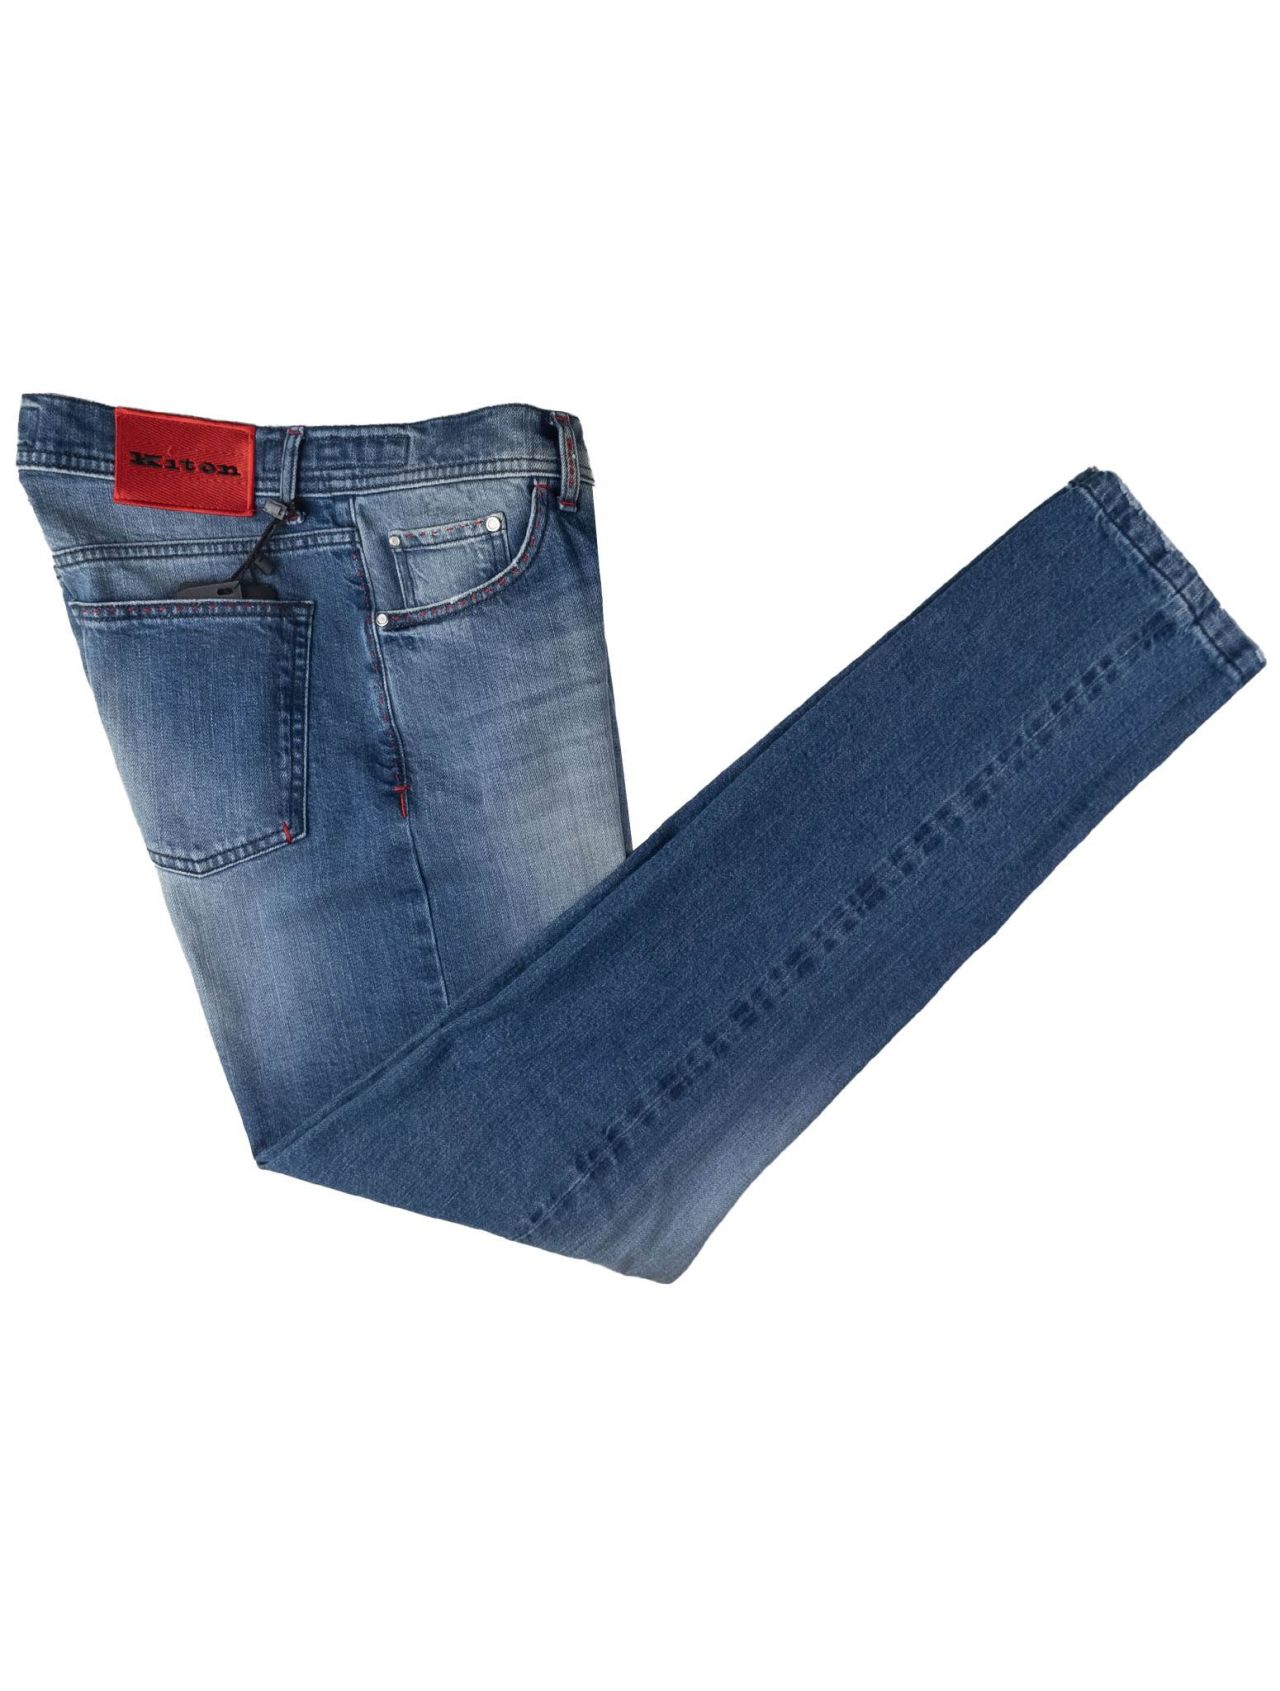 Lacoste Denim Jeans at Rs 320/piece | Jeans Pants in Varanasi | ID:  2851421169973